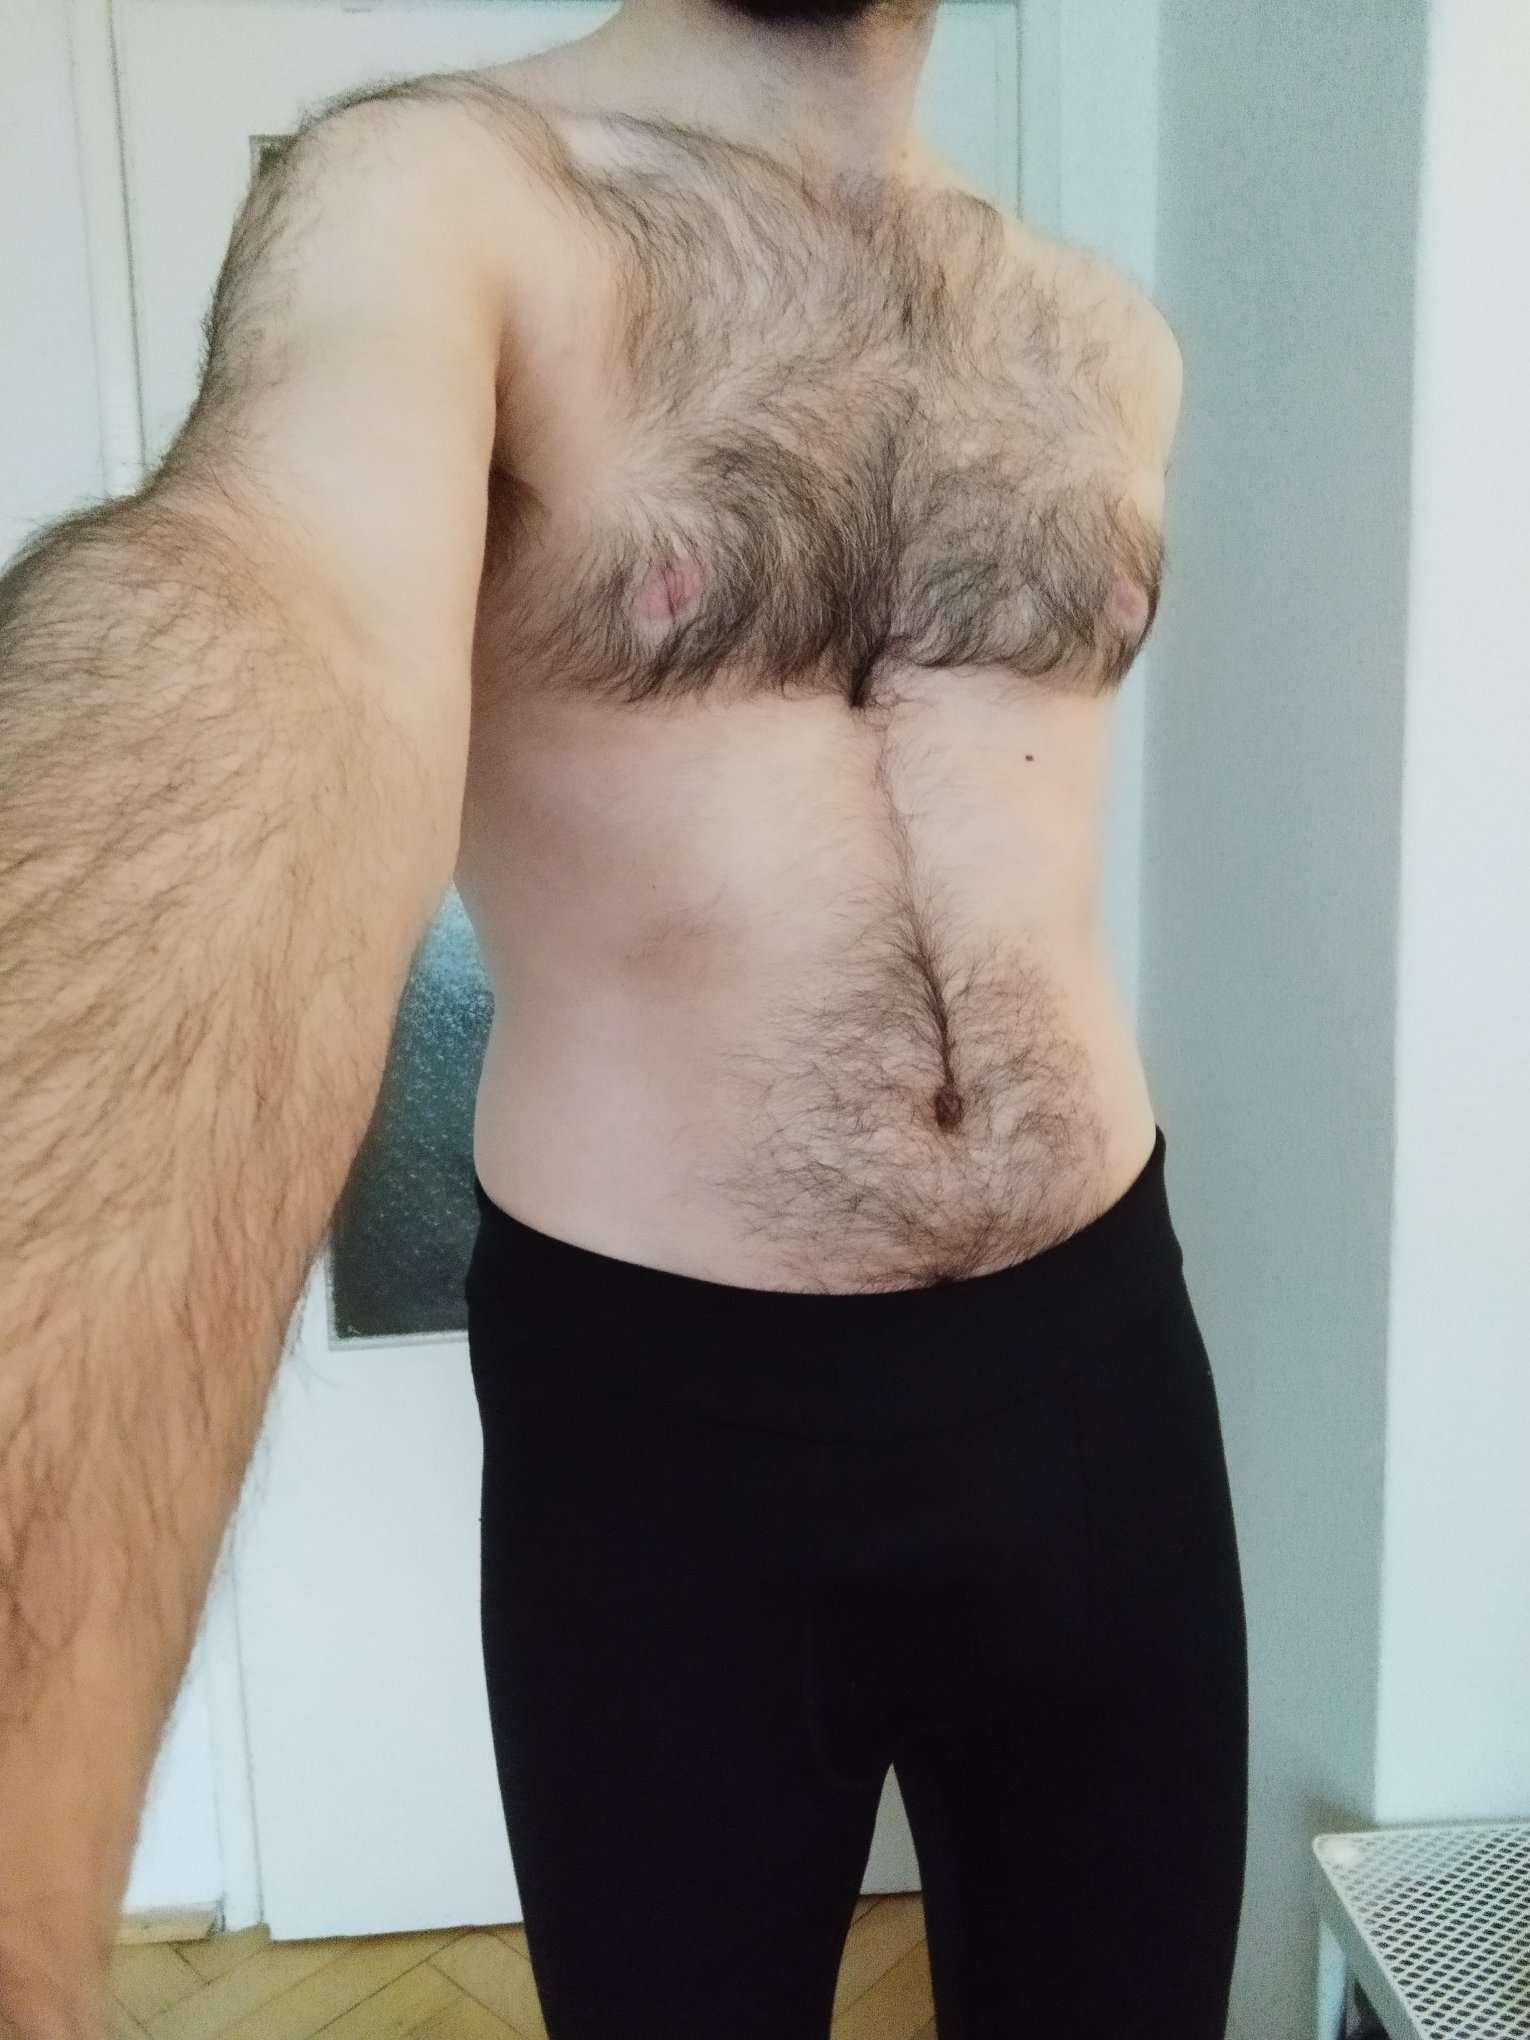 online live sex chat HairyFrenchMan